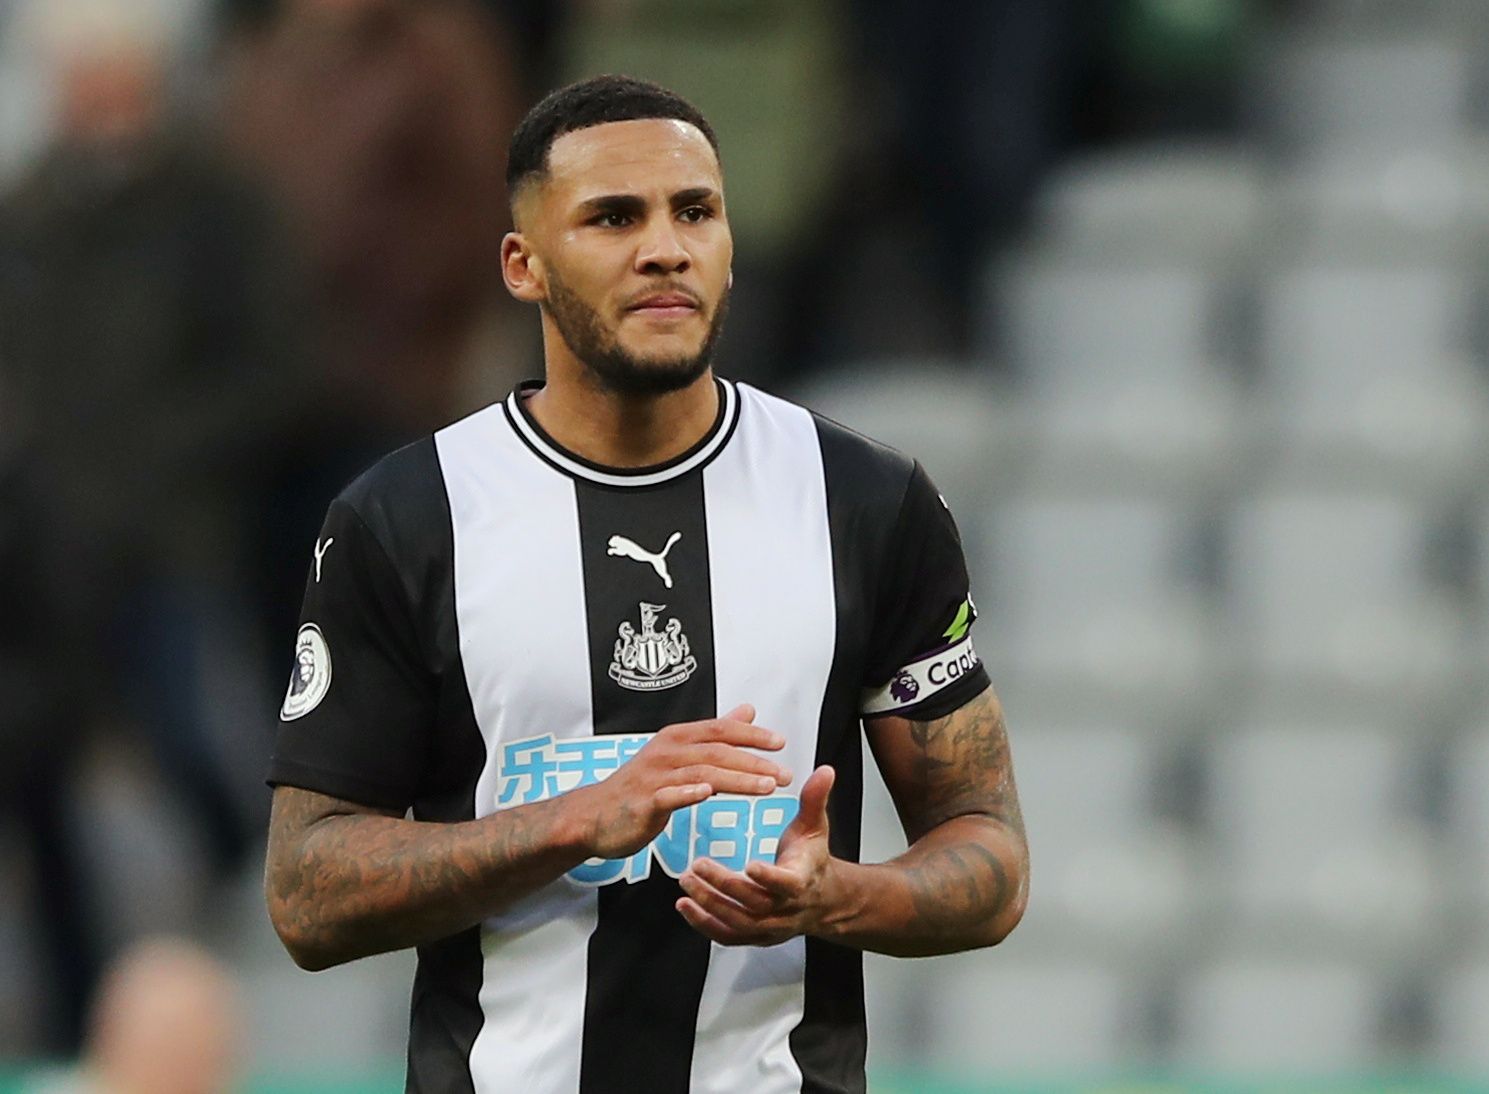 Soccer Football - Premier League - Newcastle United v Wolverhampton Wanderers - St James' Park, Newcastle, Britain - October 27, 2019 Newcastle United's Jamaal Lascelles after the match  Action Images via Reuters/Molly Darlington  EDITORIAL USE ONLY. No use with unauthorized audio, video, data, fixture lists, club/league logos or "live" services. Online in-match use limited to 75 images, no video emulation. No use in betting, games or single club/league/player publications.  Please contact your 